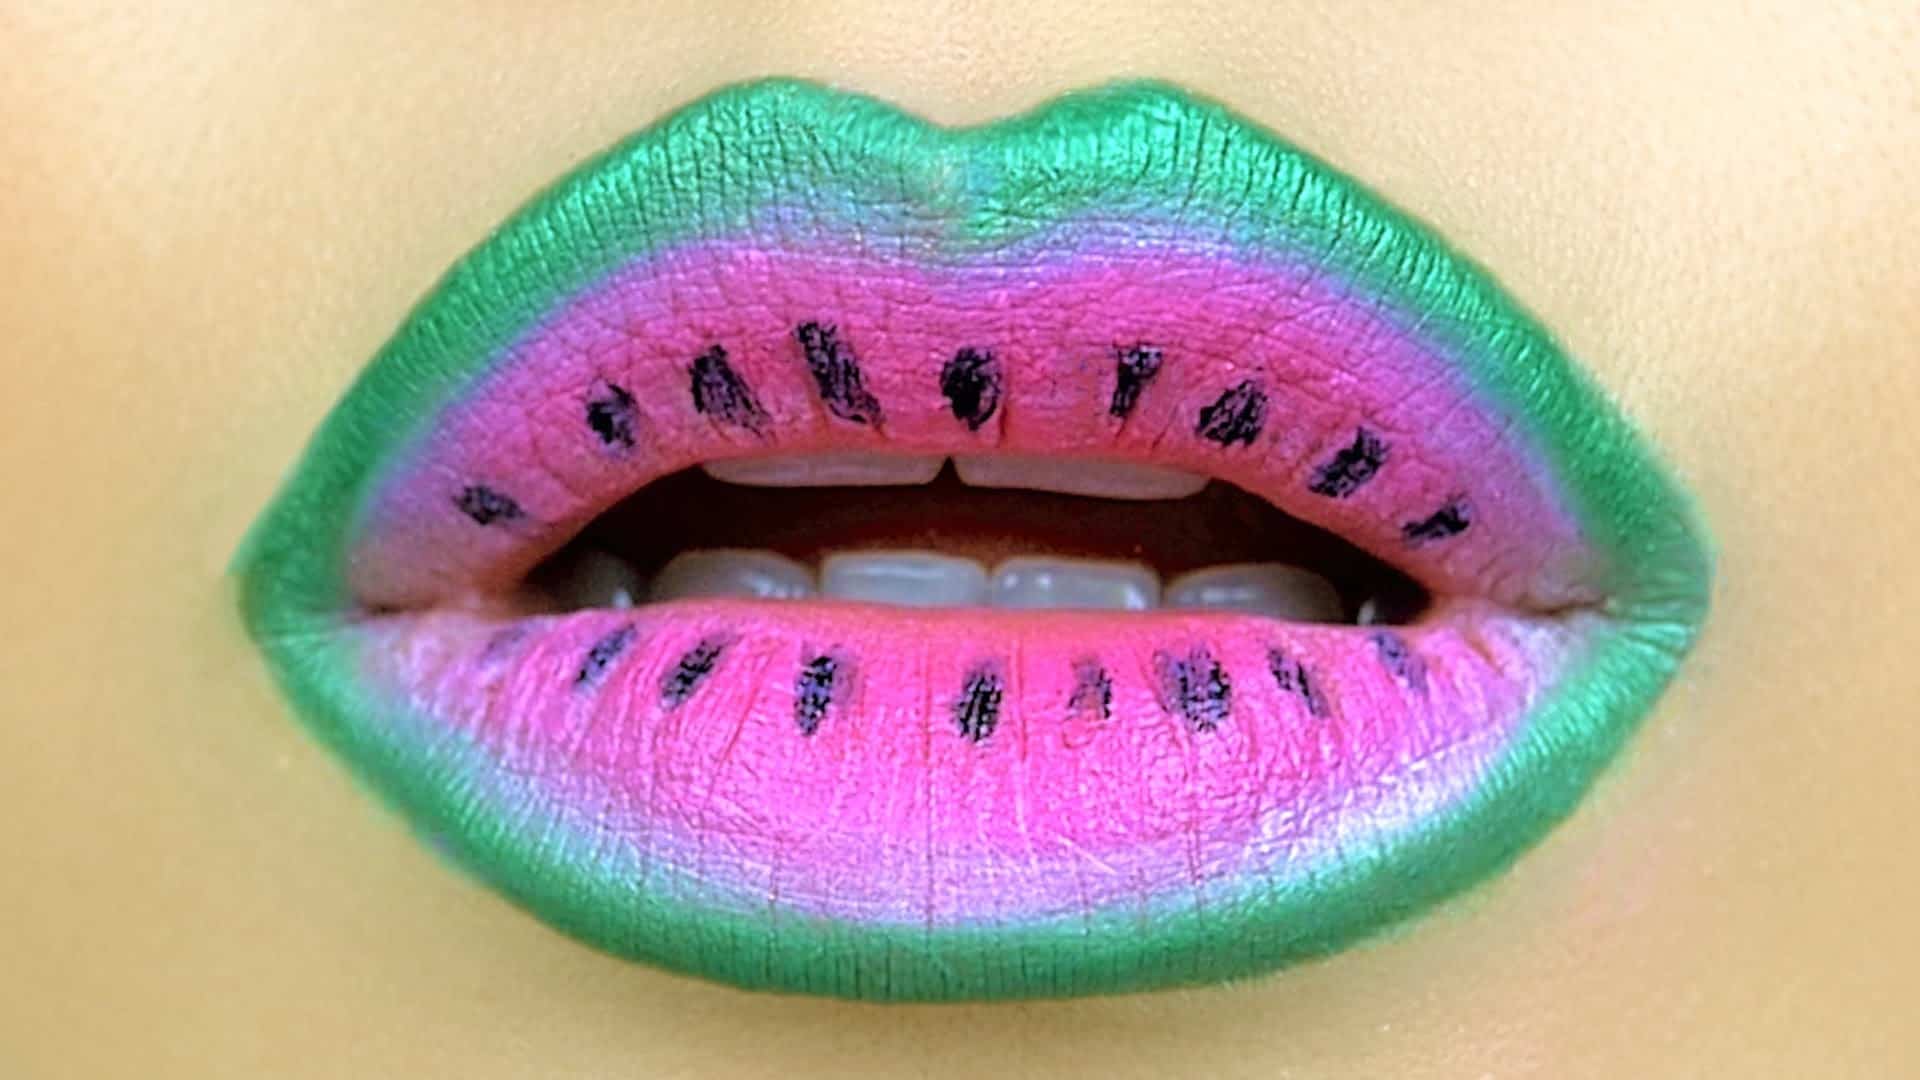 Awesome lip art design, wow!